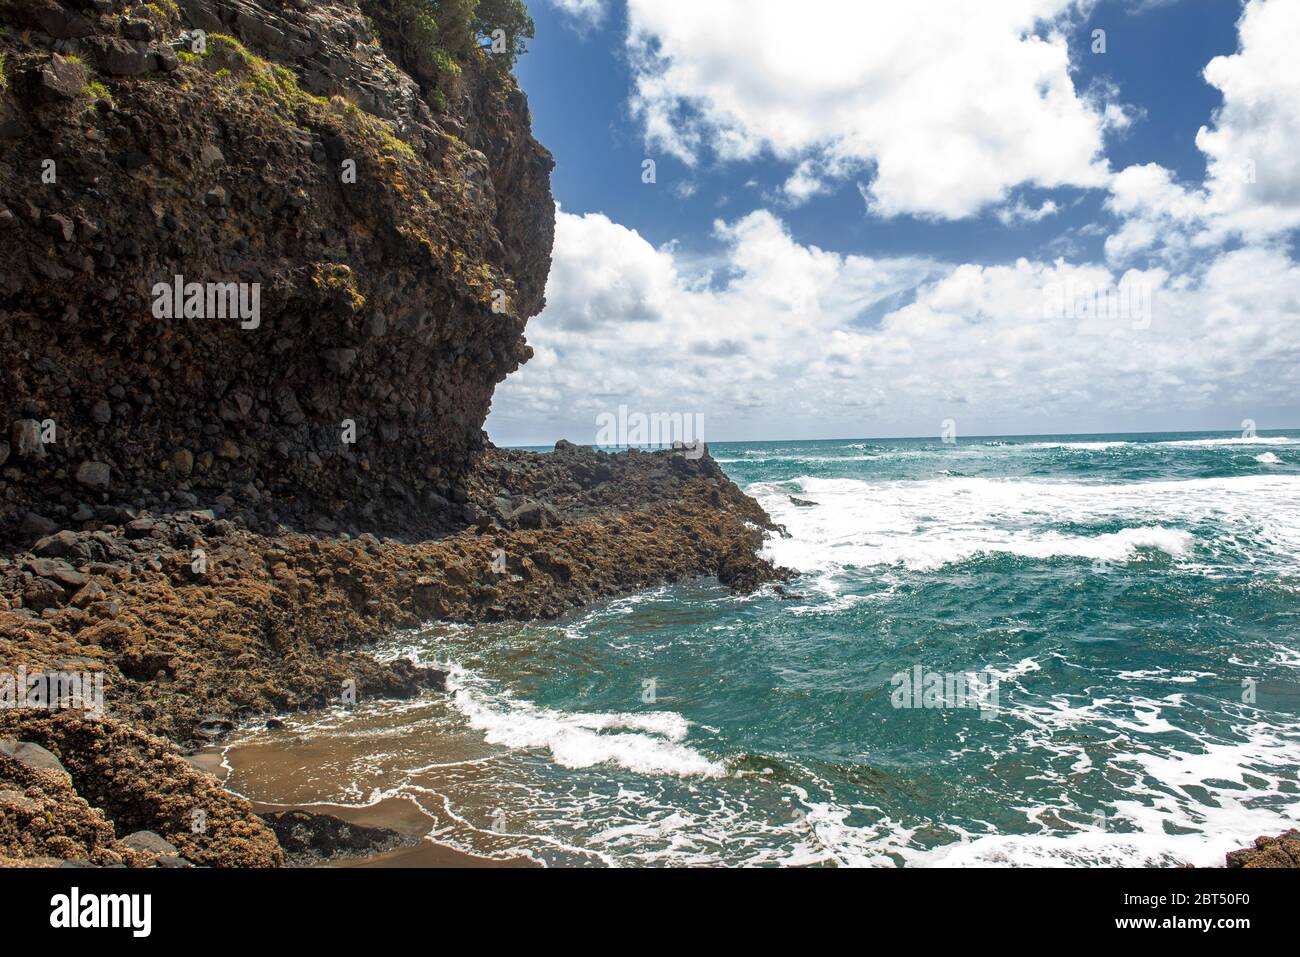 Seascape of a cliff near the ocean under a blue sky with clouds Stock Photo